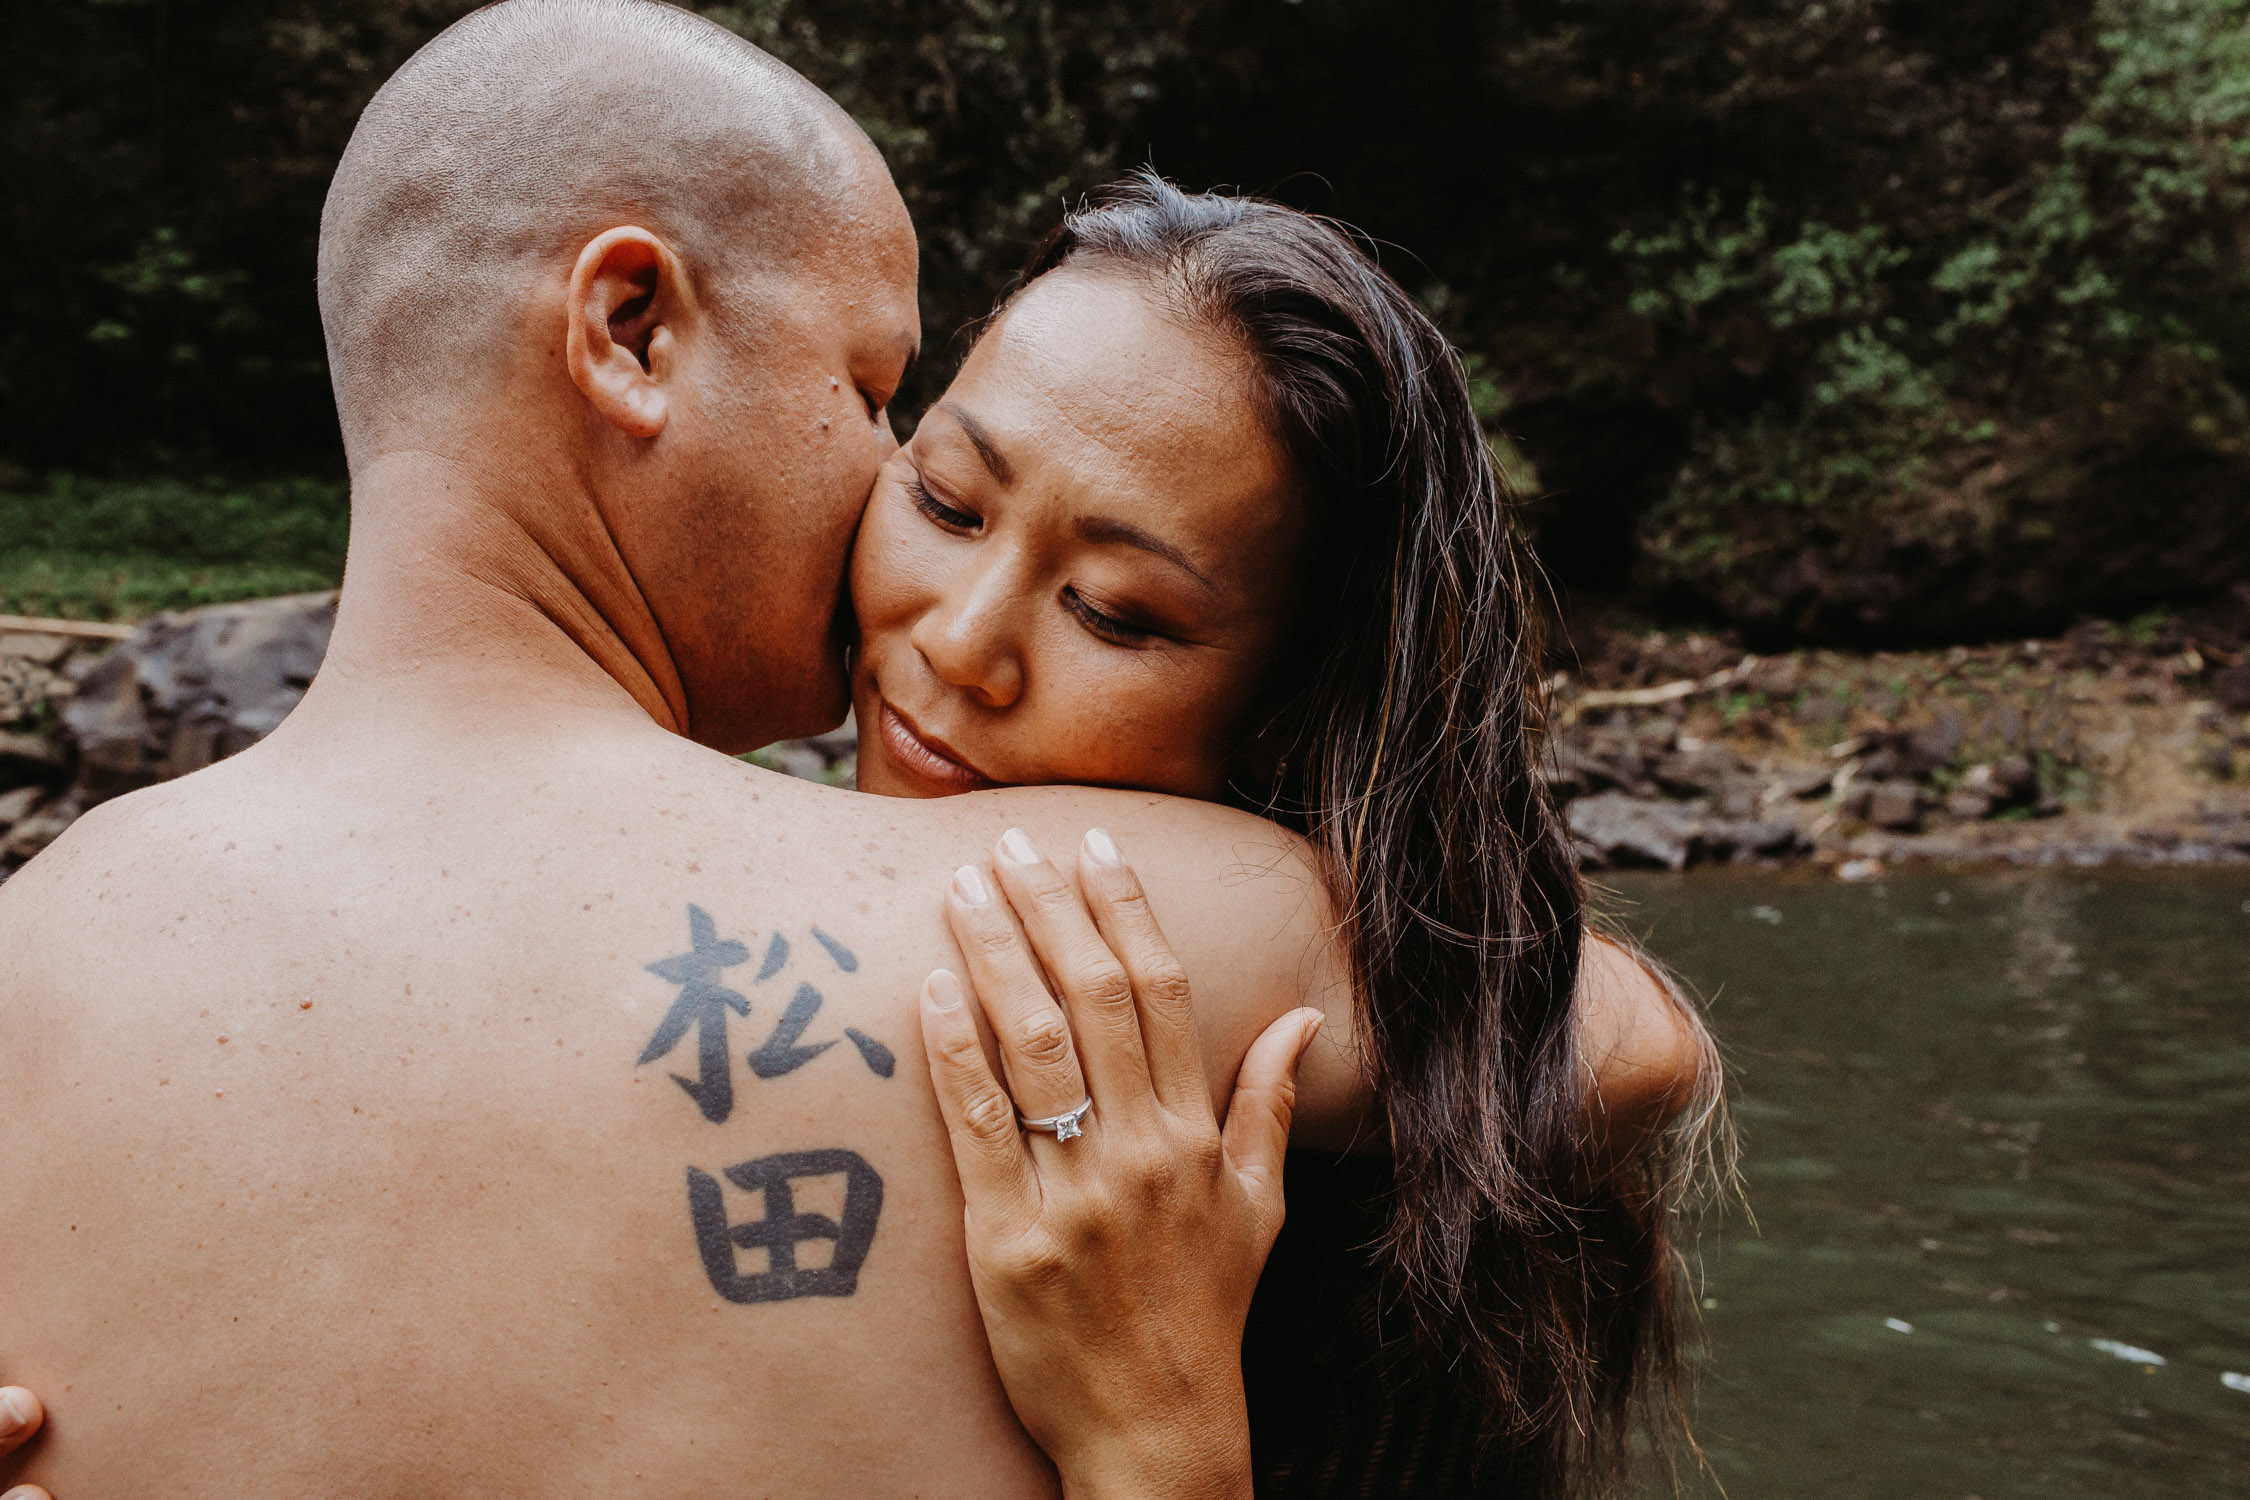 Man kisses his fiance on the cheek as she hugs him during their Hawaii engagement photoshoot by Liz Koston.